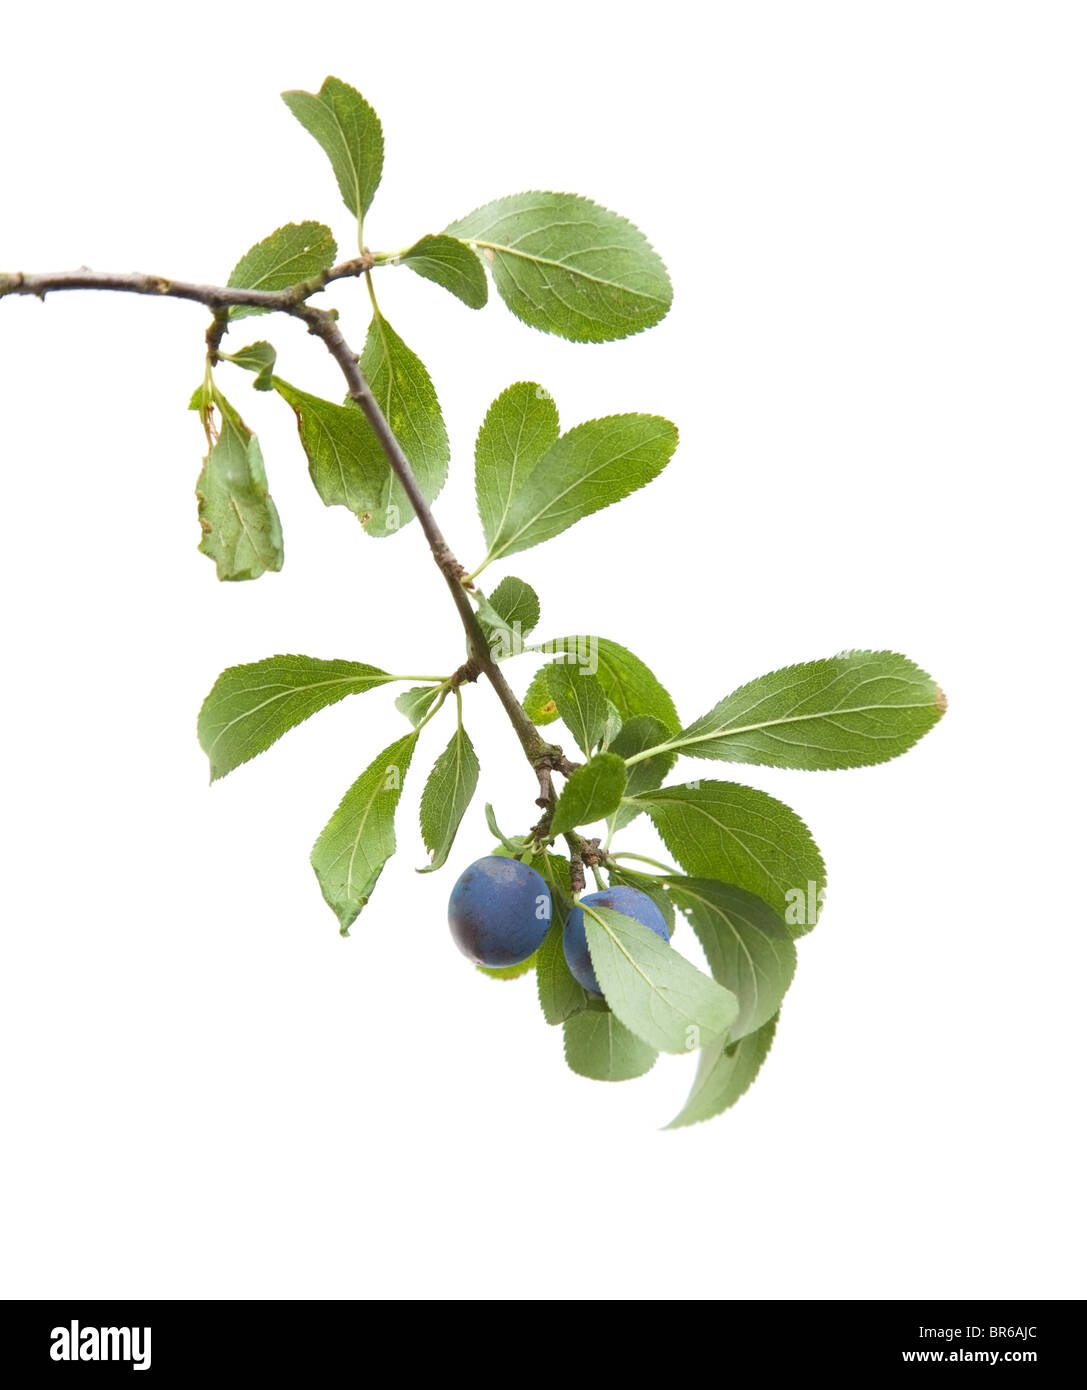 Prunus spinosa (blackthorn; sloe) small branch with berries isolated on white background Stock Photo